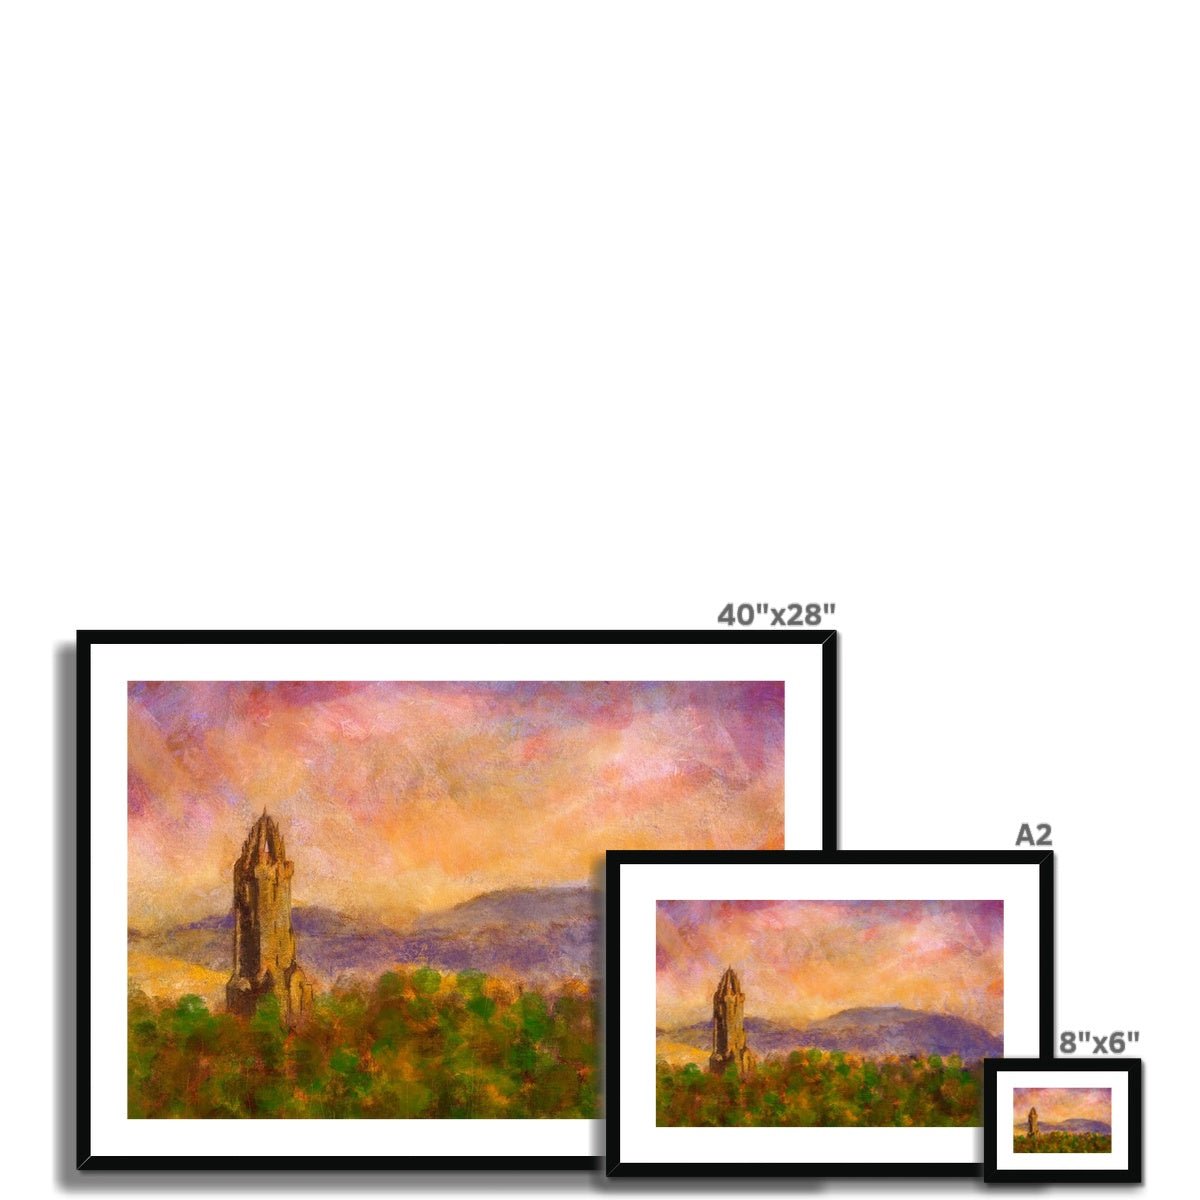 Wallace Monument Dusk Painting | Framed & Mounted Prints From Scotland-Framed & Mounted Prints-Historic & Iconic Scotland Art Gallery-Paintings, Prints, Homeware, Art Gifts From Scotland By Scottish Artist Kevin Hunter